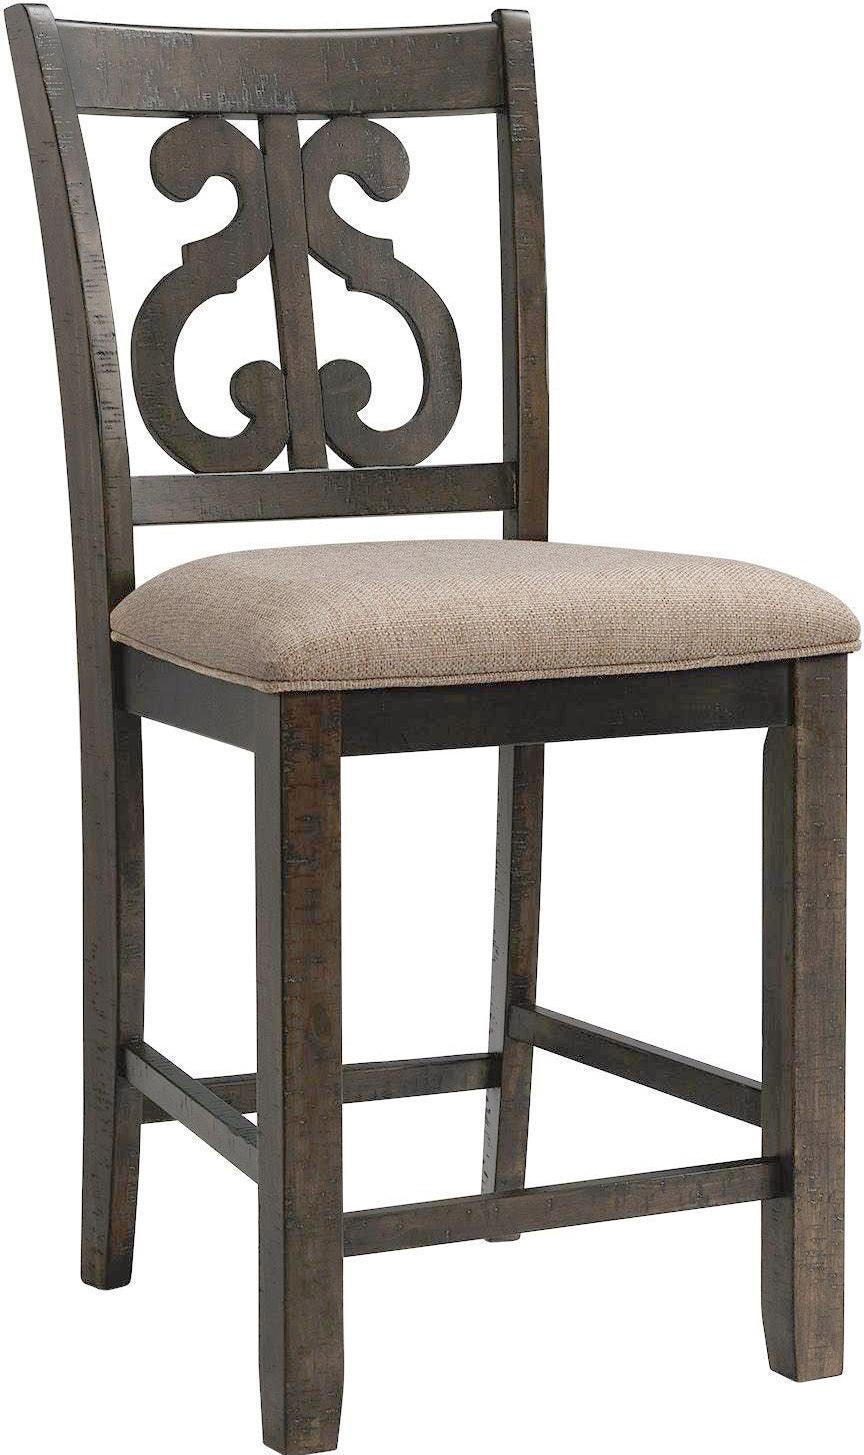 Elements Barstools - Stanford Counter Swirl Back Side Chair Set (Set of 2)